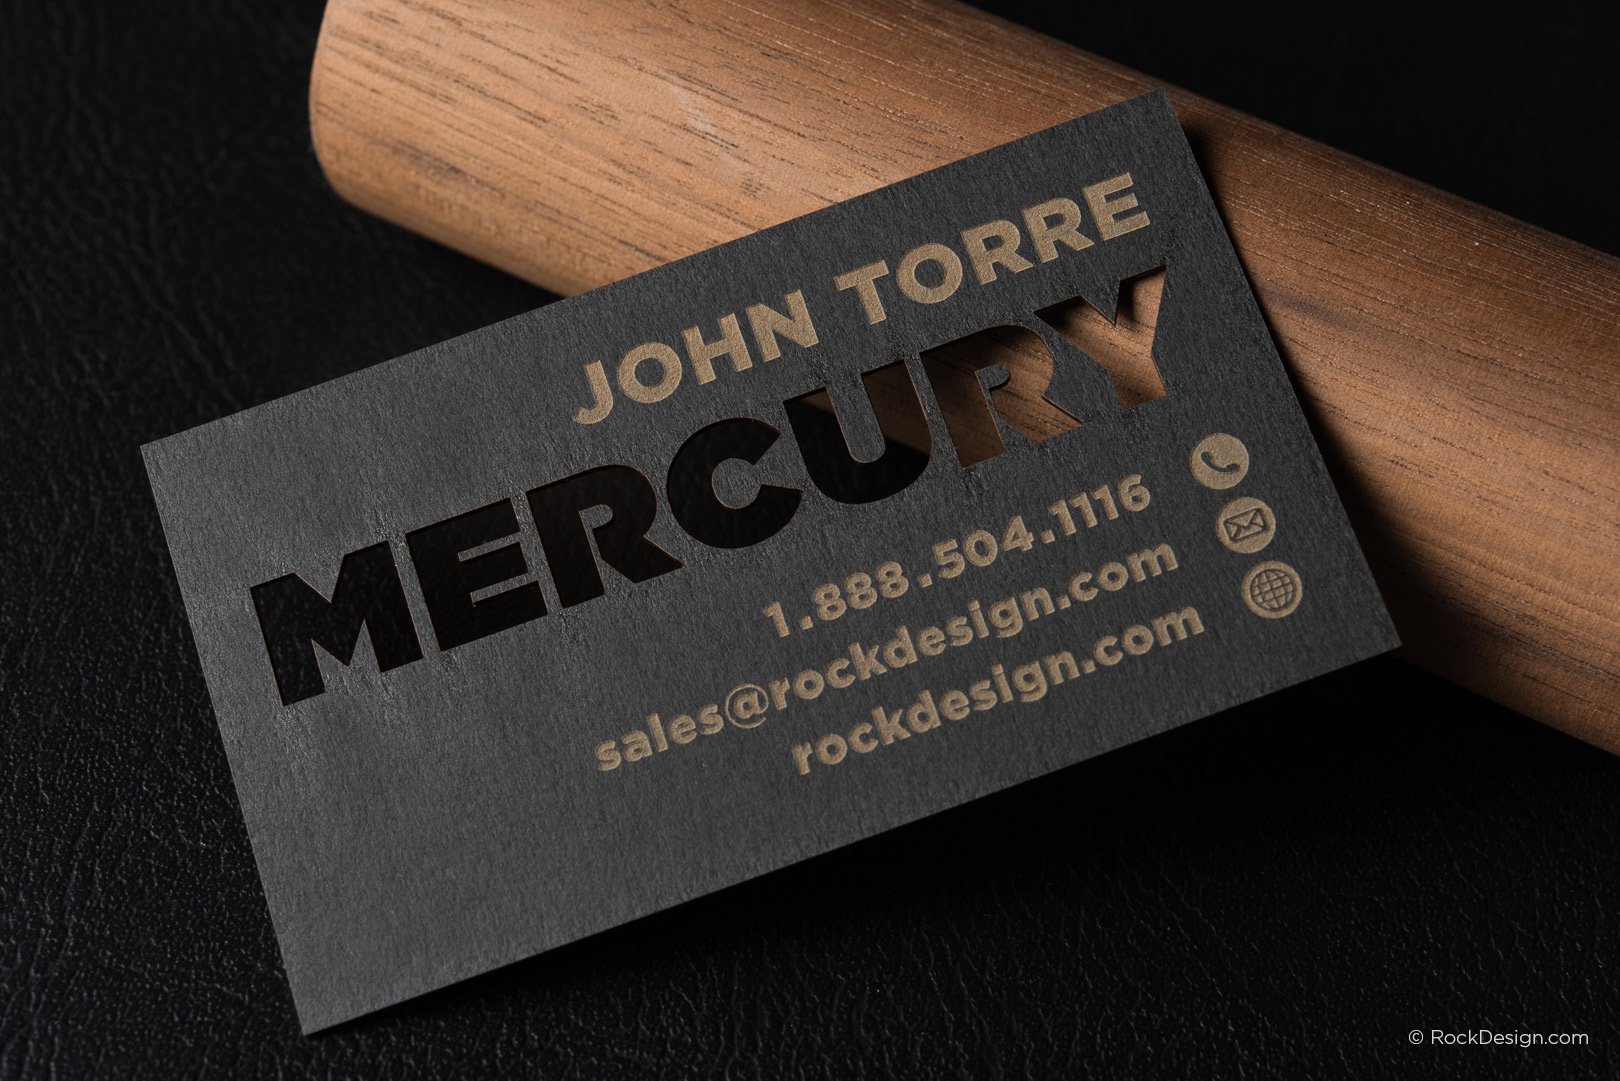 laser printed business cards 2